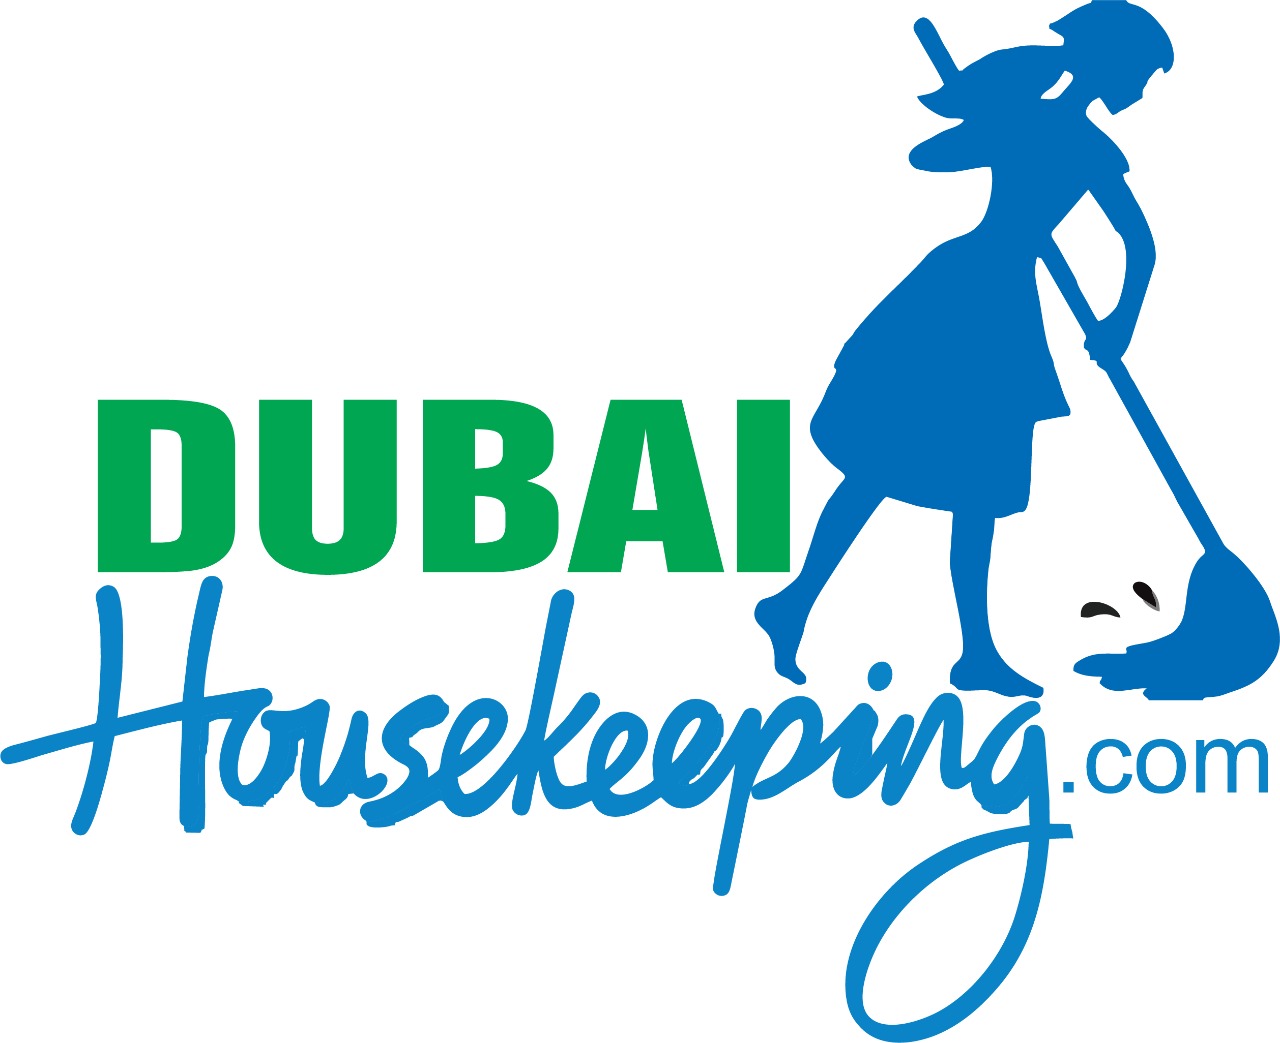 Book the floor scrubbing and cleaning service in Dubai